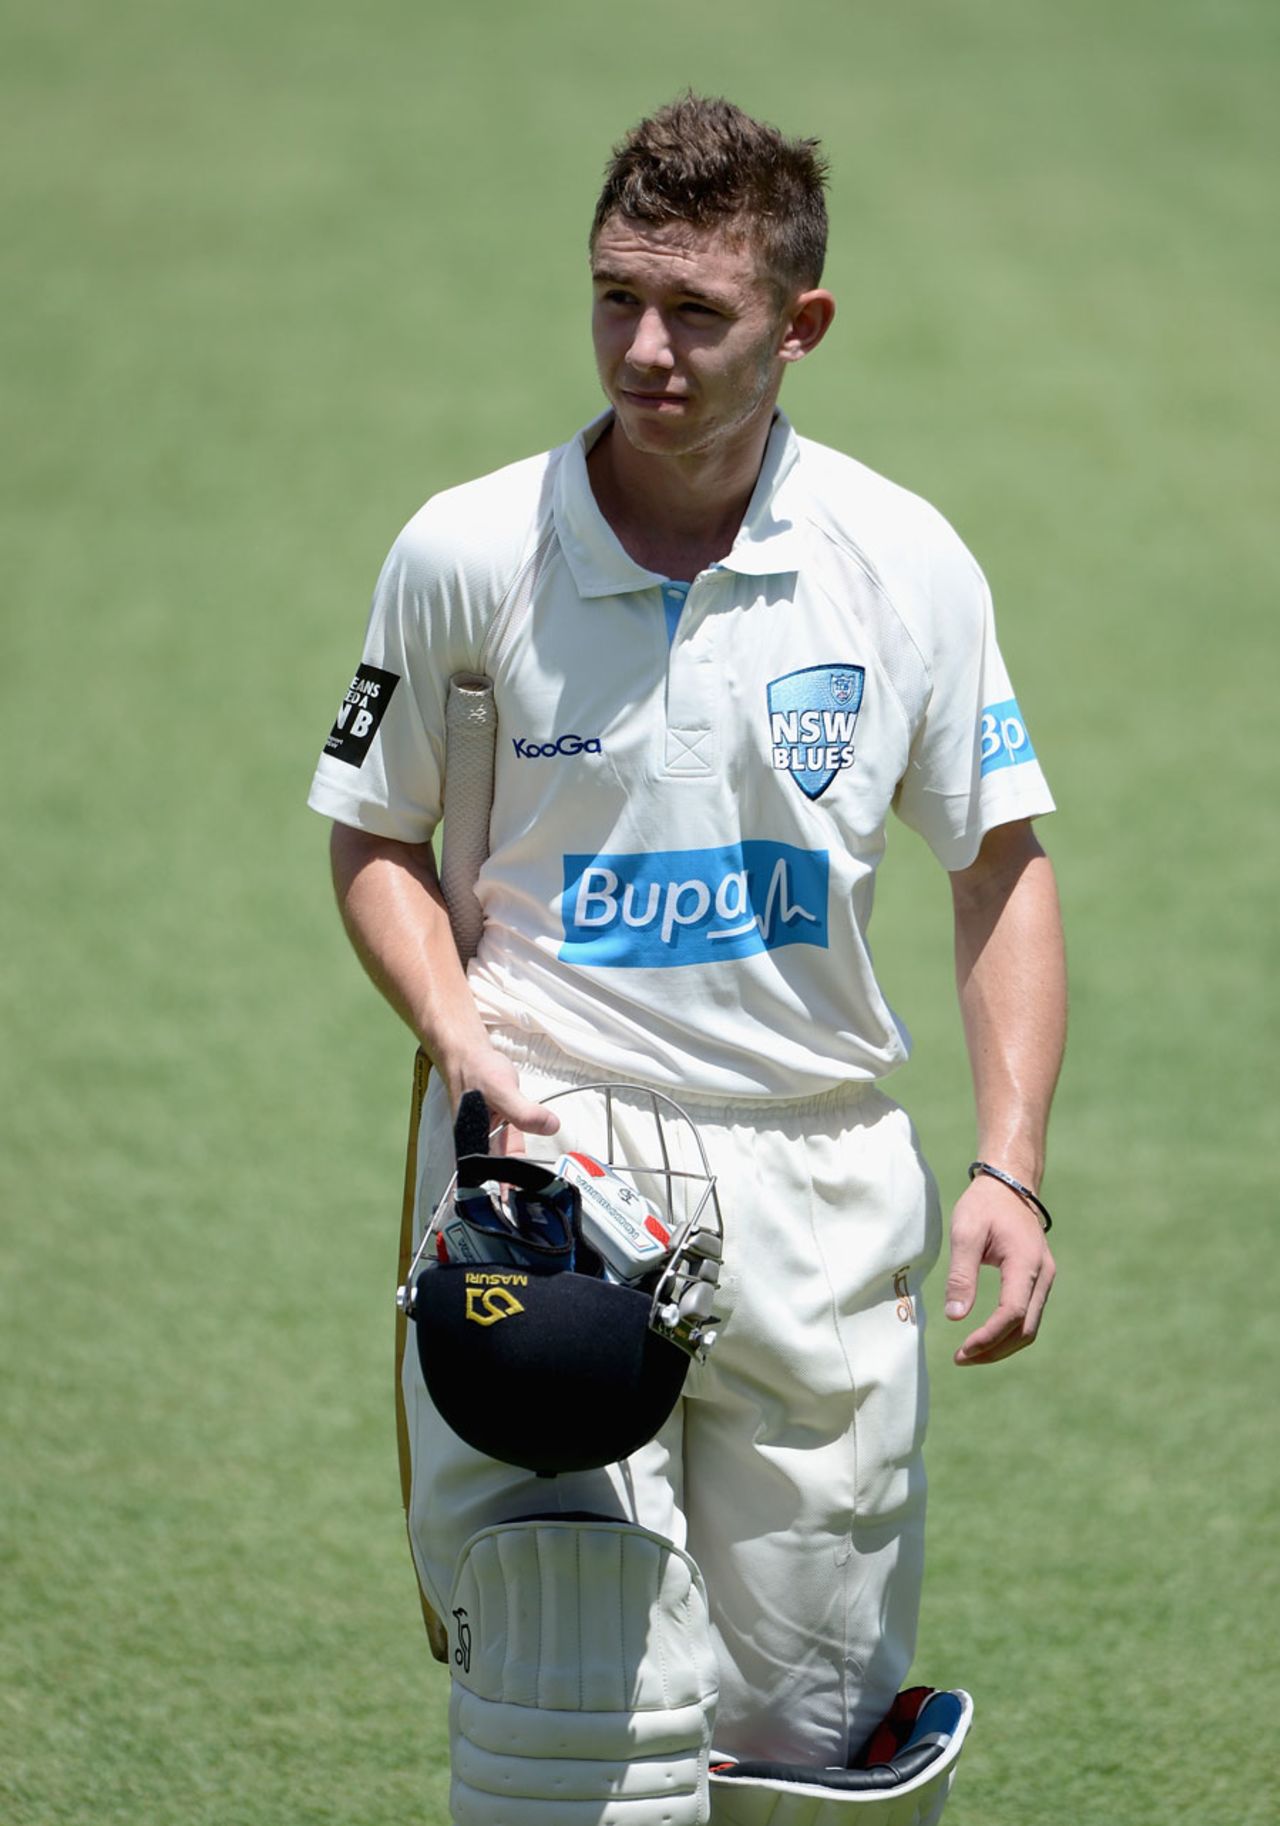 Jake Doran was dismissed for 17, CA Chairman's XI v England XI, Tour match, Alice Springs, 2nd day, November 30, 2013